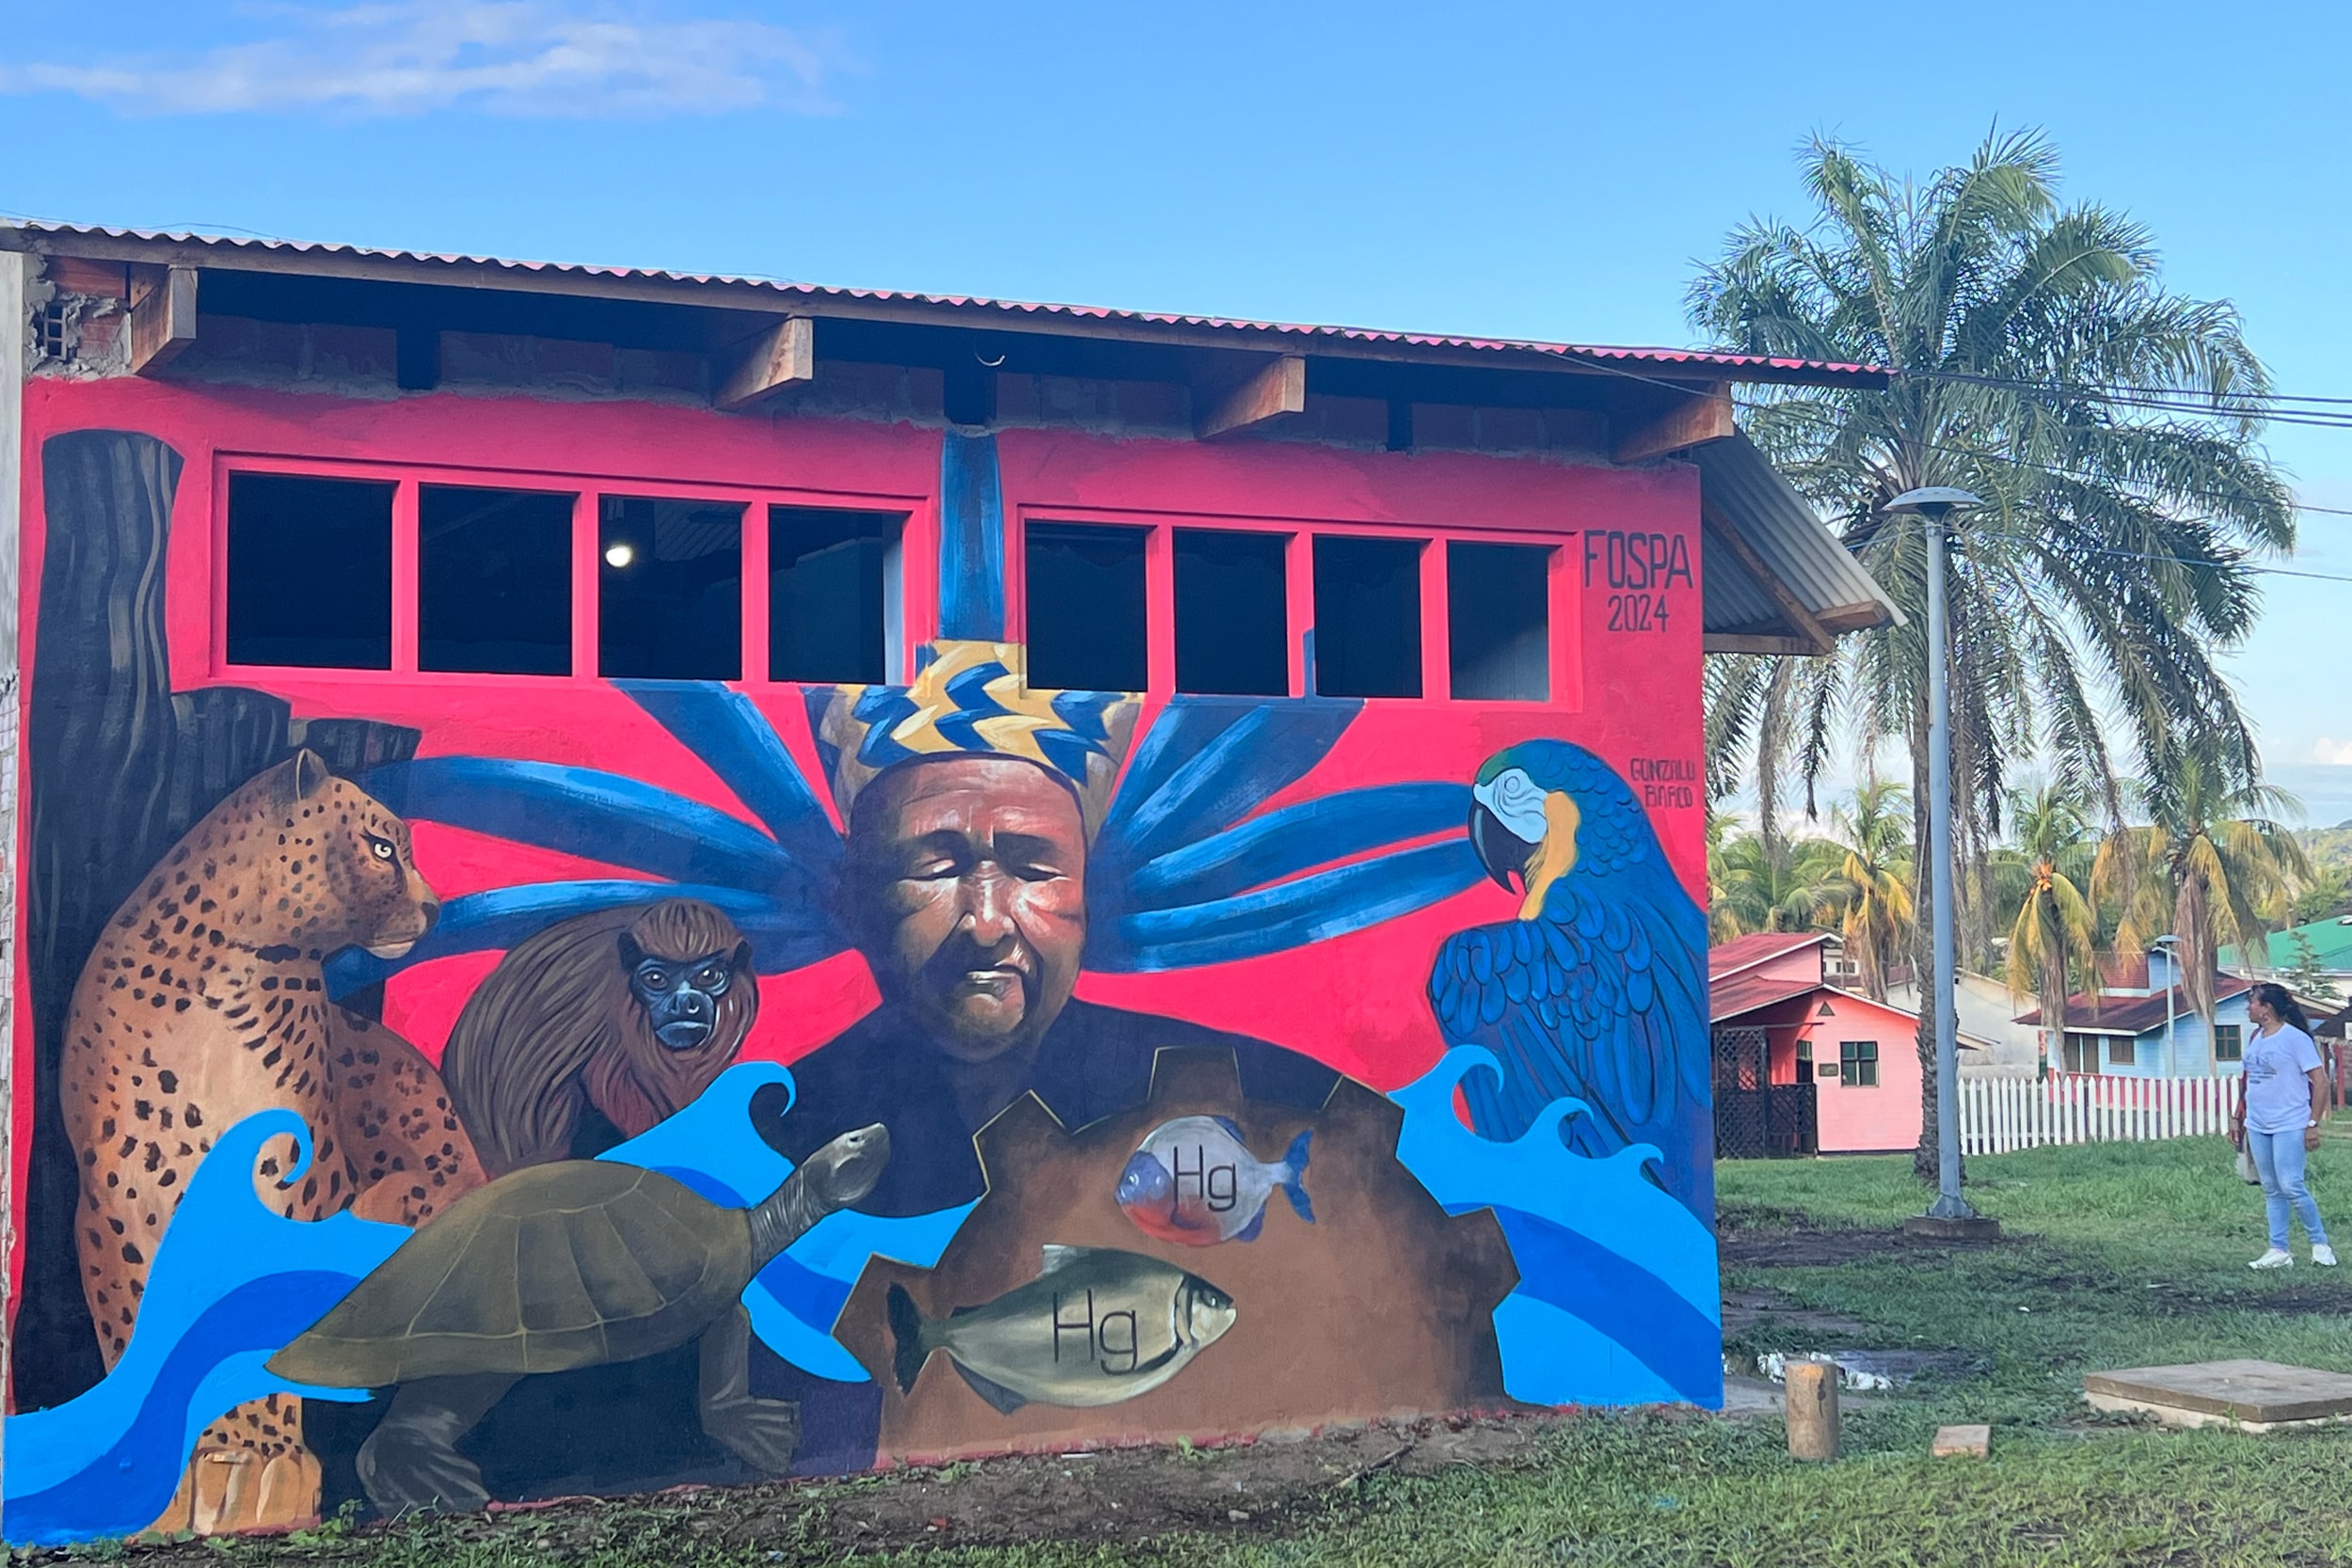 A colorful mural of an Indigenous person surrounded by Amazonian animals.